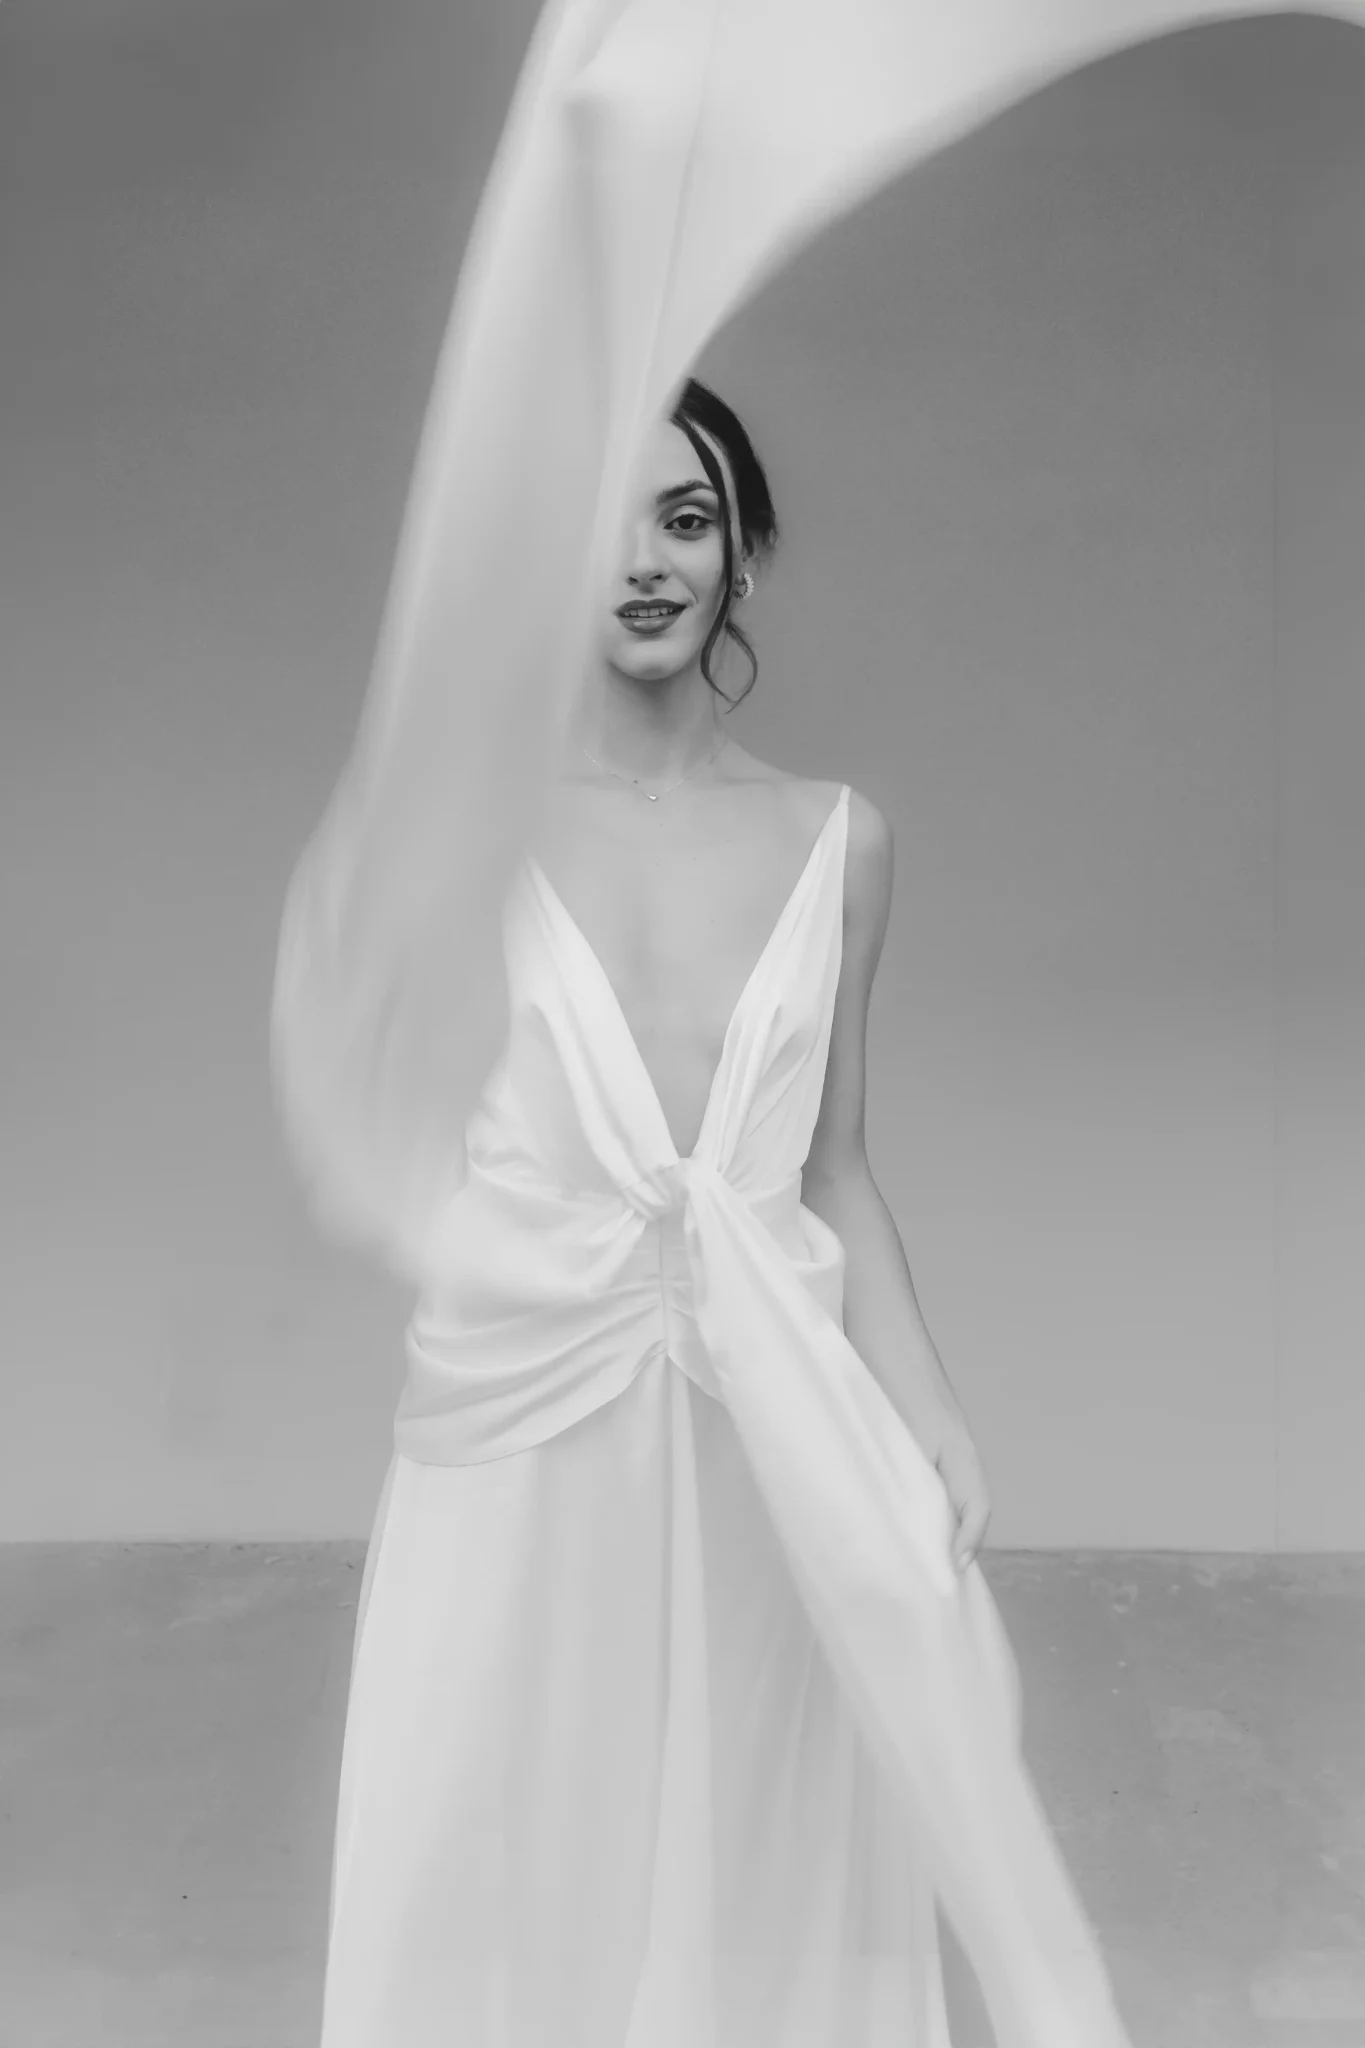 Creative editorial wedding photo of a bride with part of her wedding dress in motion